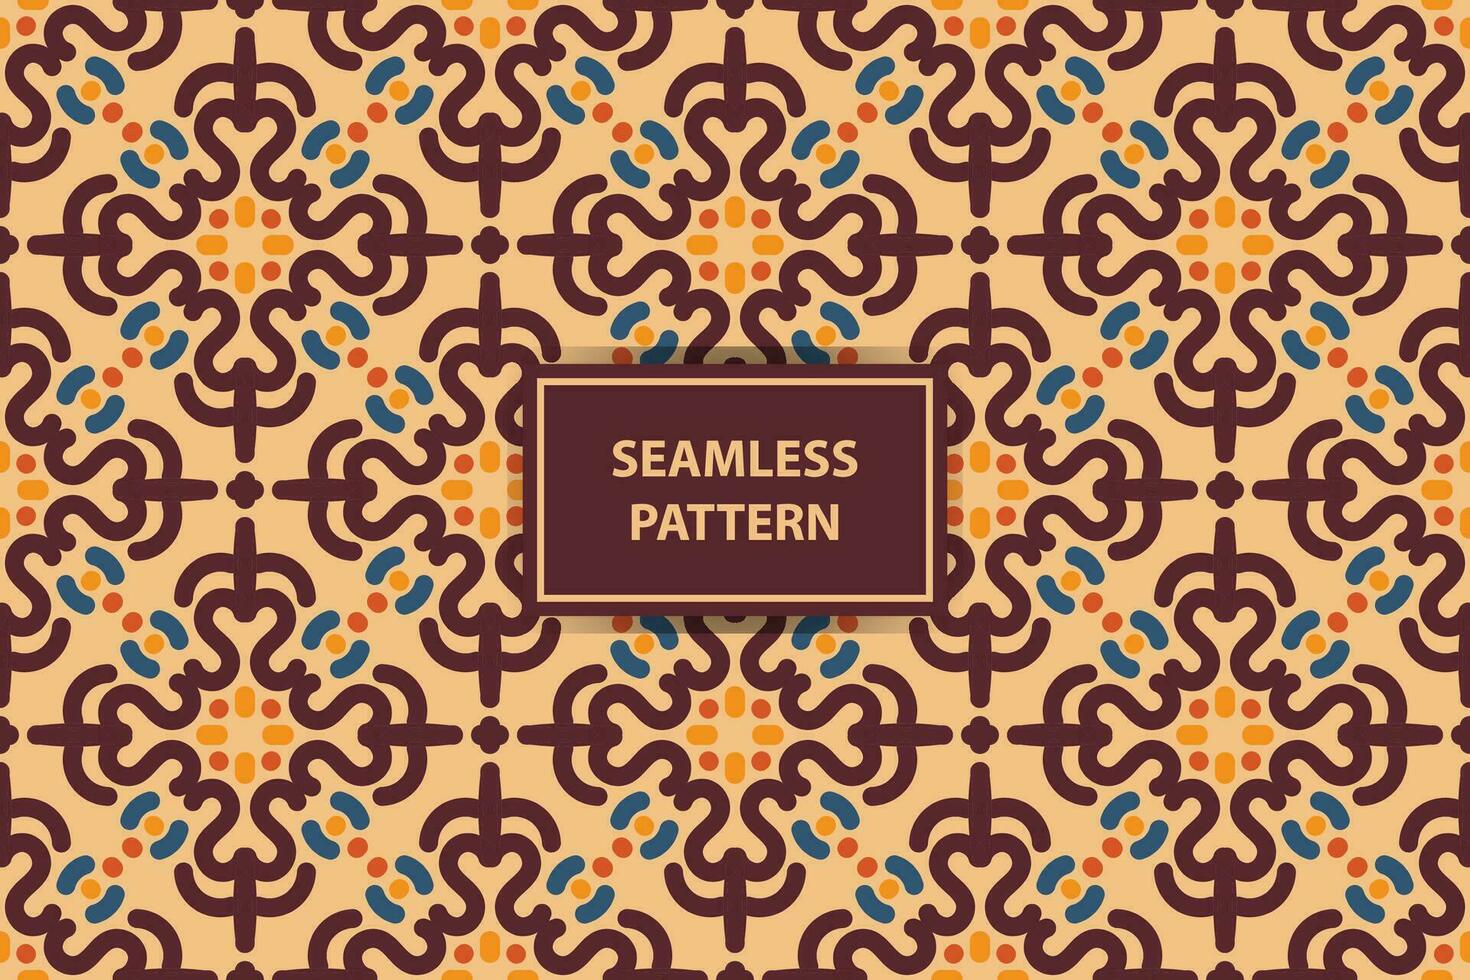 Moroccan Ethnic seamless pattern design. Aztec fabric carpet mandala ornament chevron textile decoration wallpaper. Tribal turkey African Indian traditional embroidery vector illustrations background